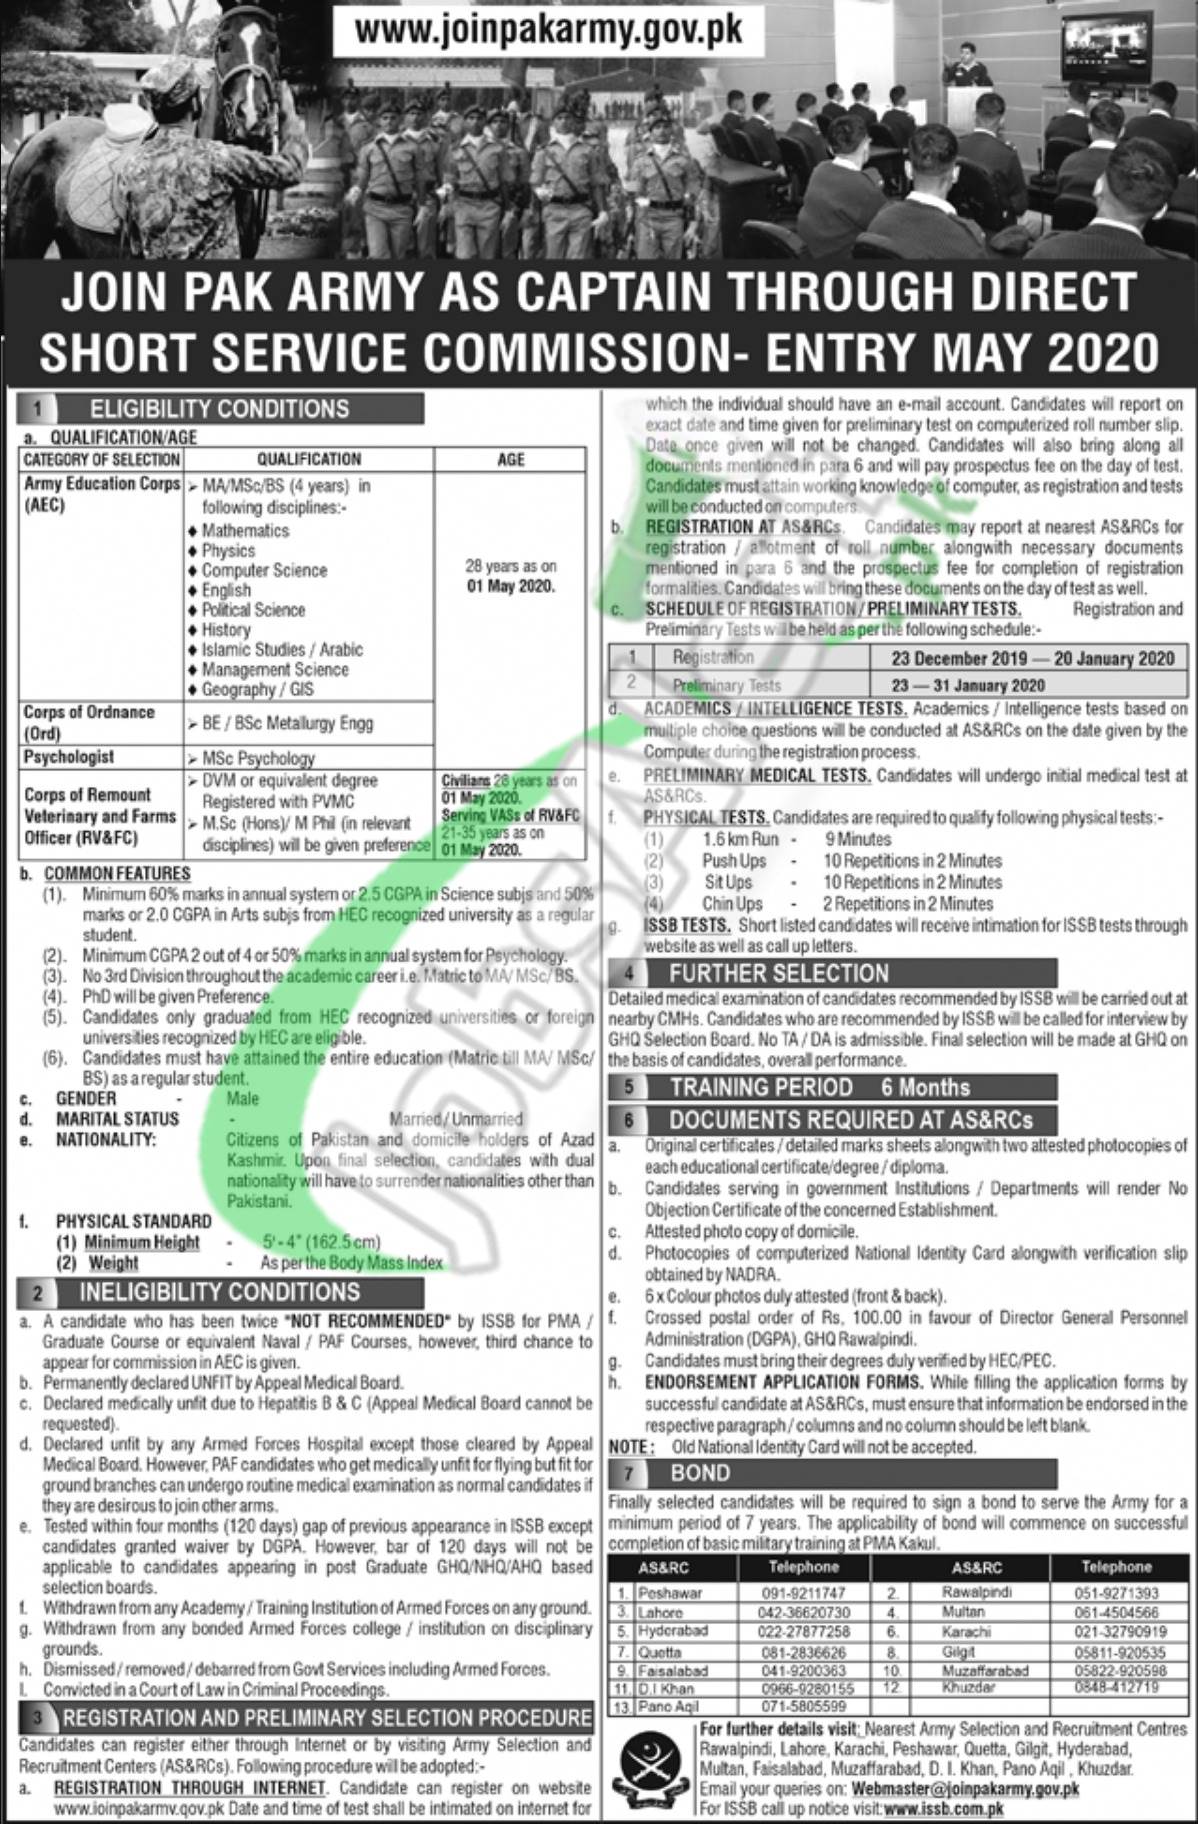 Join Pak Army As Captain Through Direct Short Service Commission